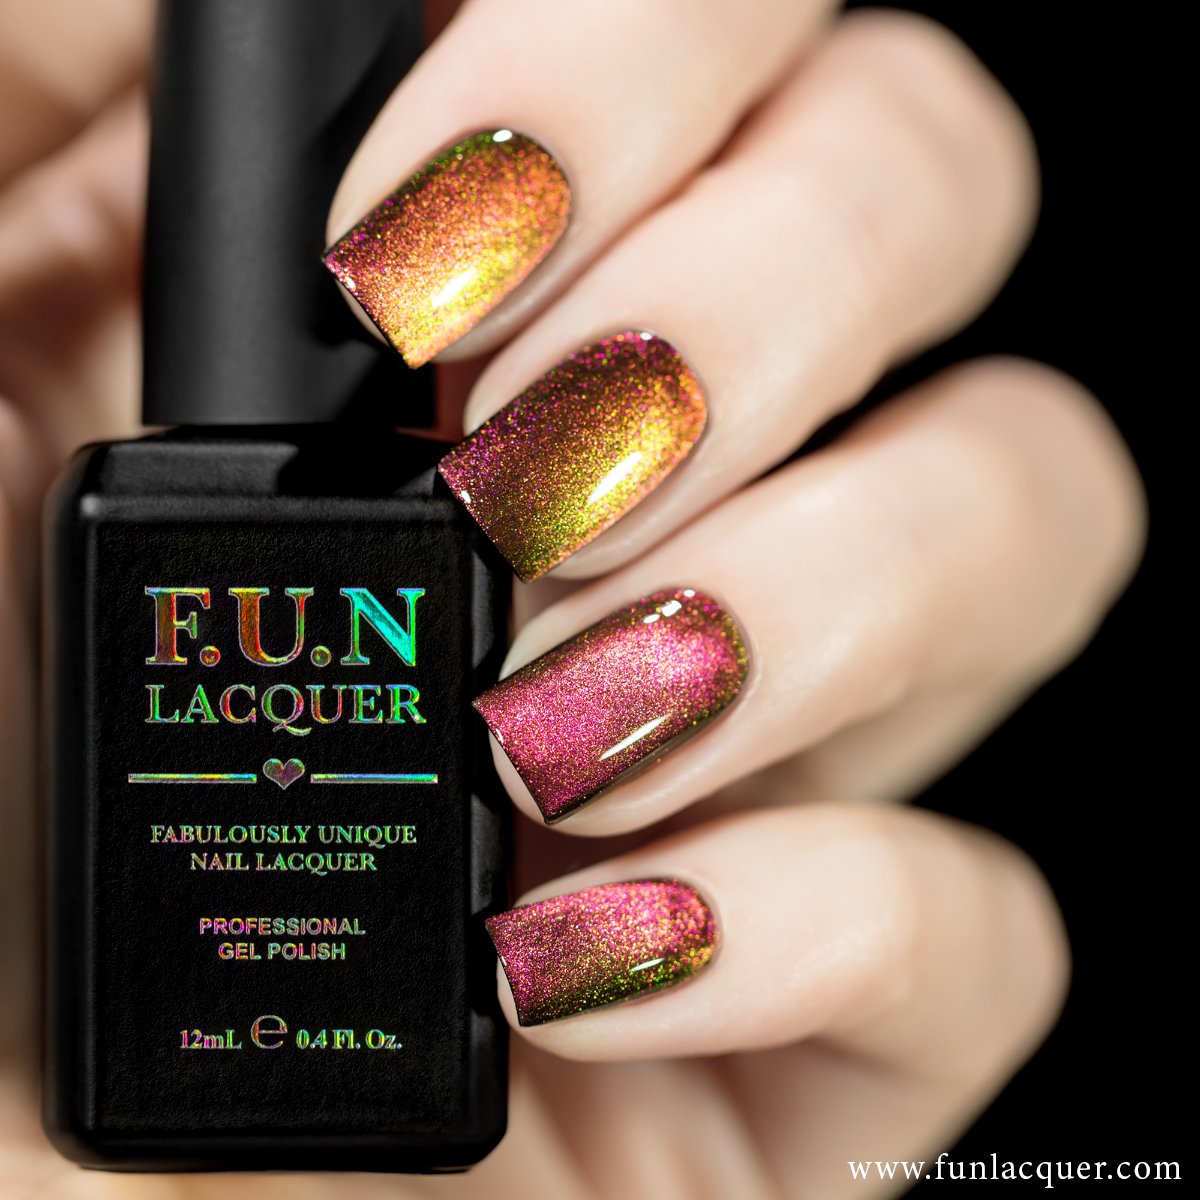 Flickriver: Most interesting photos from F.U.N. Lacquer nail polishes pool